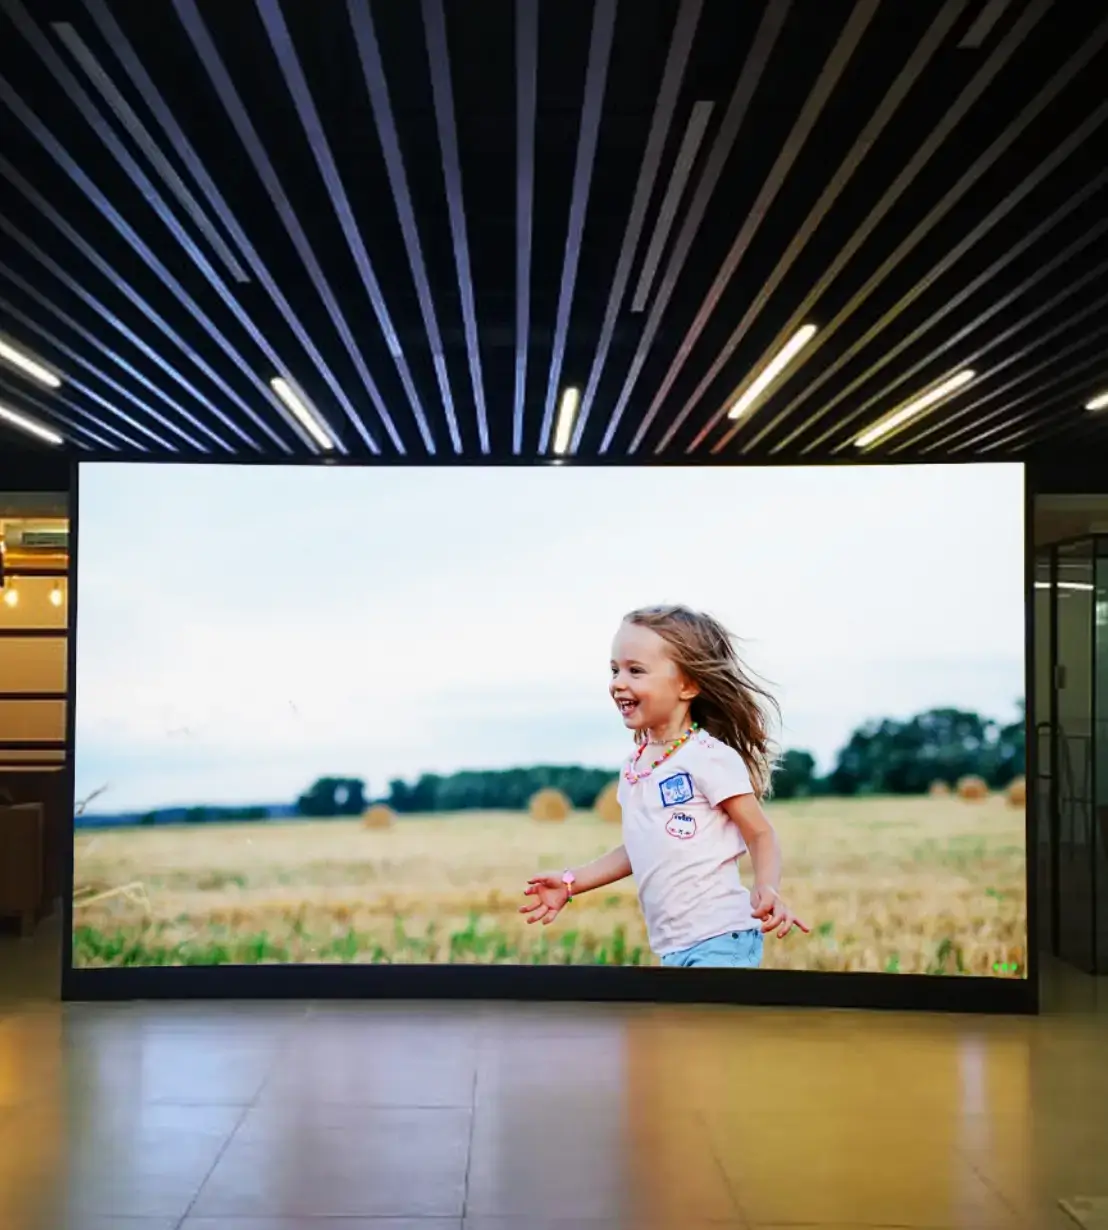 Digital signage content playing on a video wall display at a mall premises which is powered by Pickcel